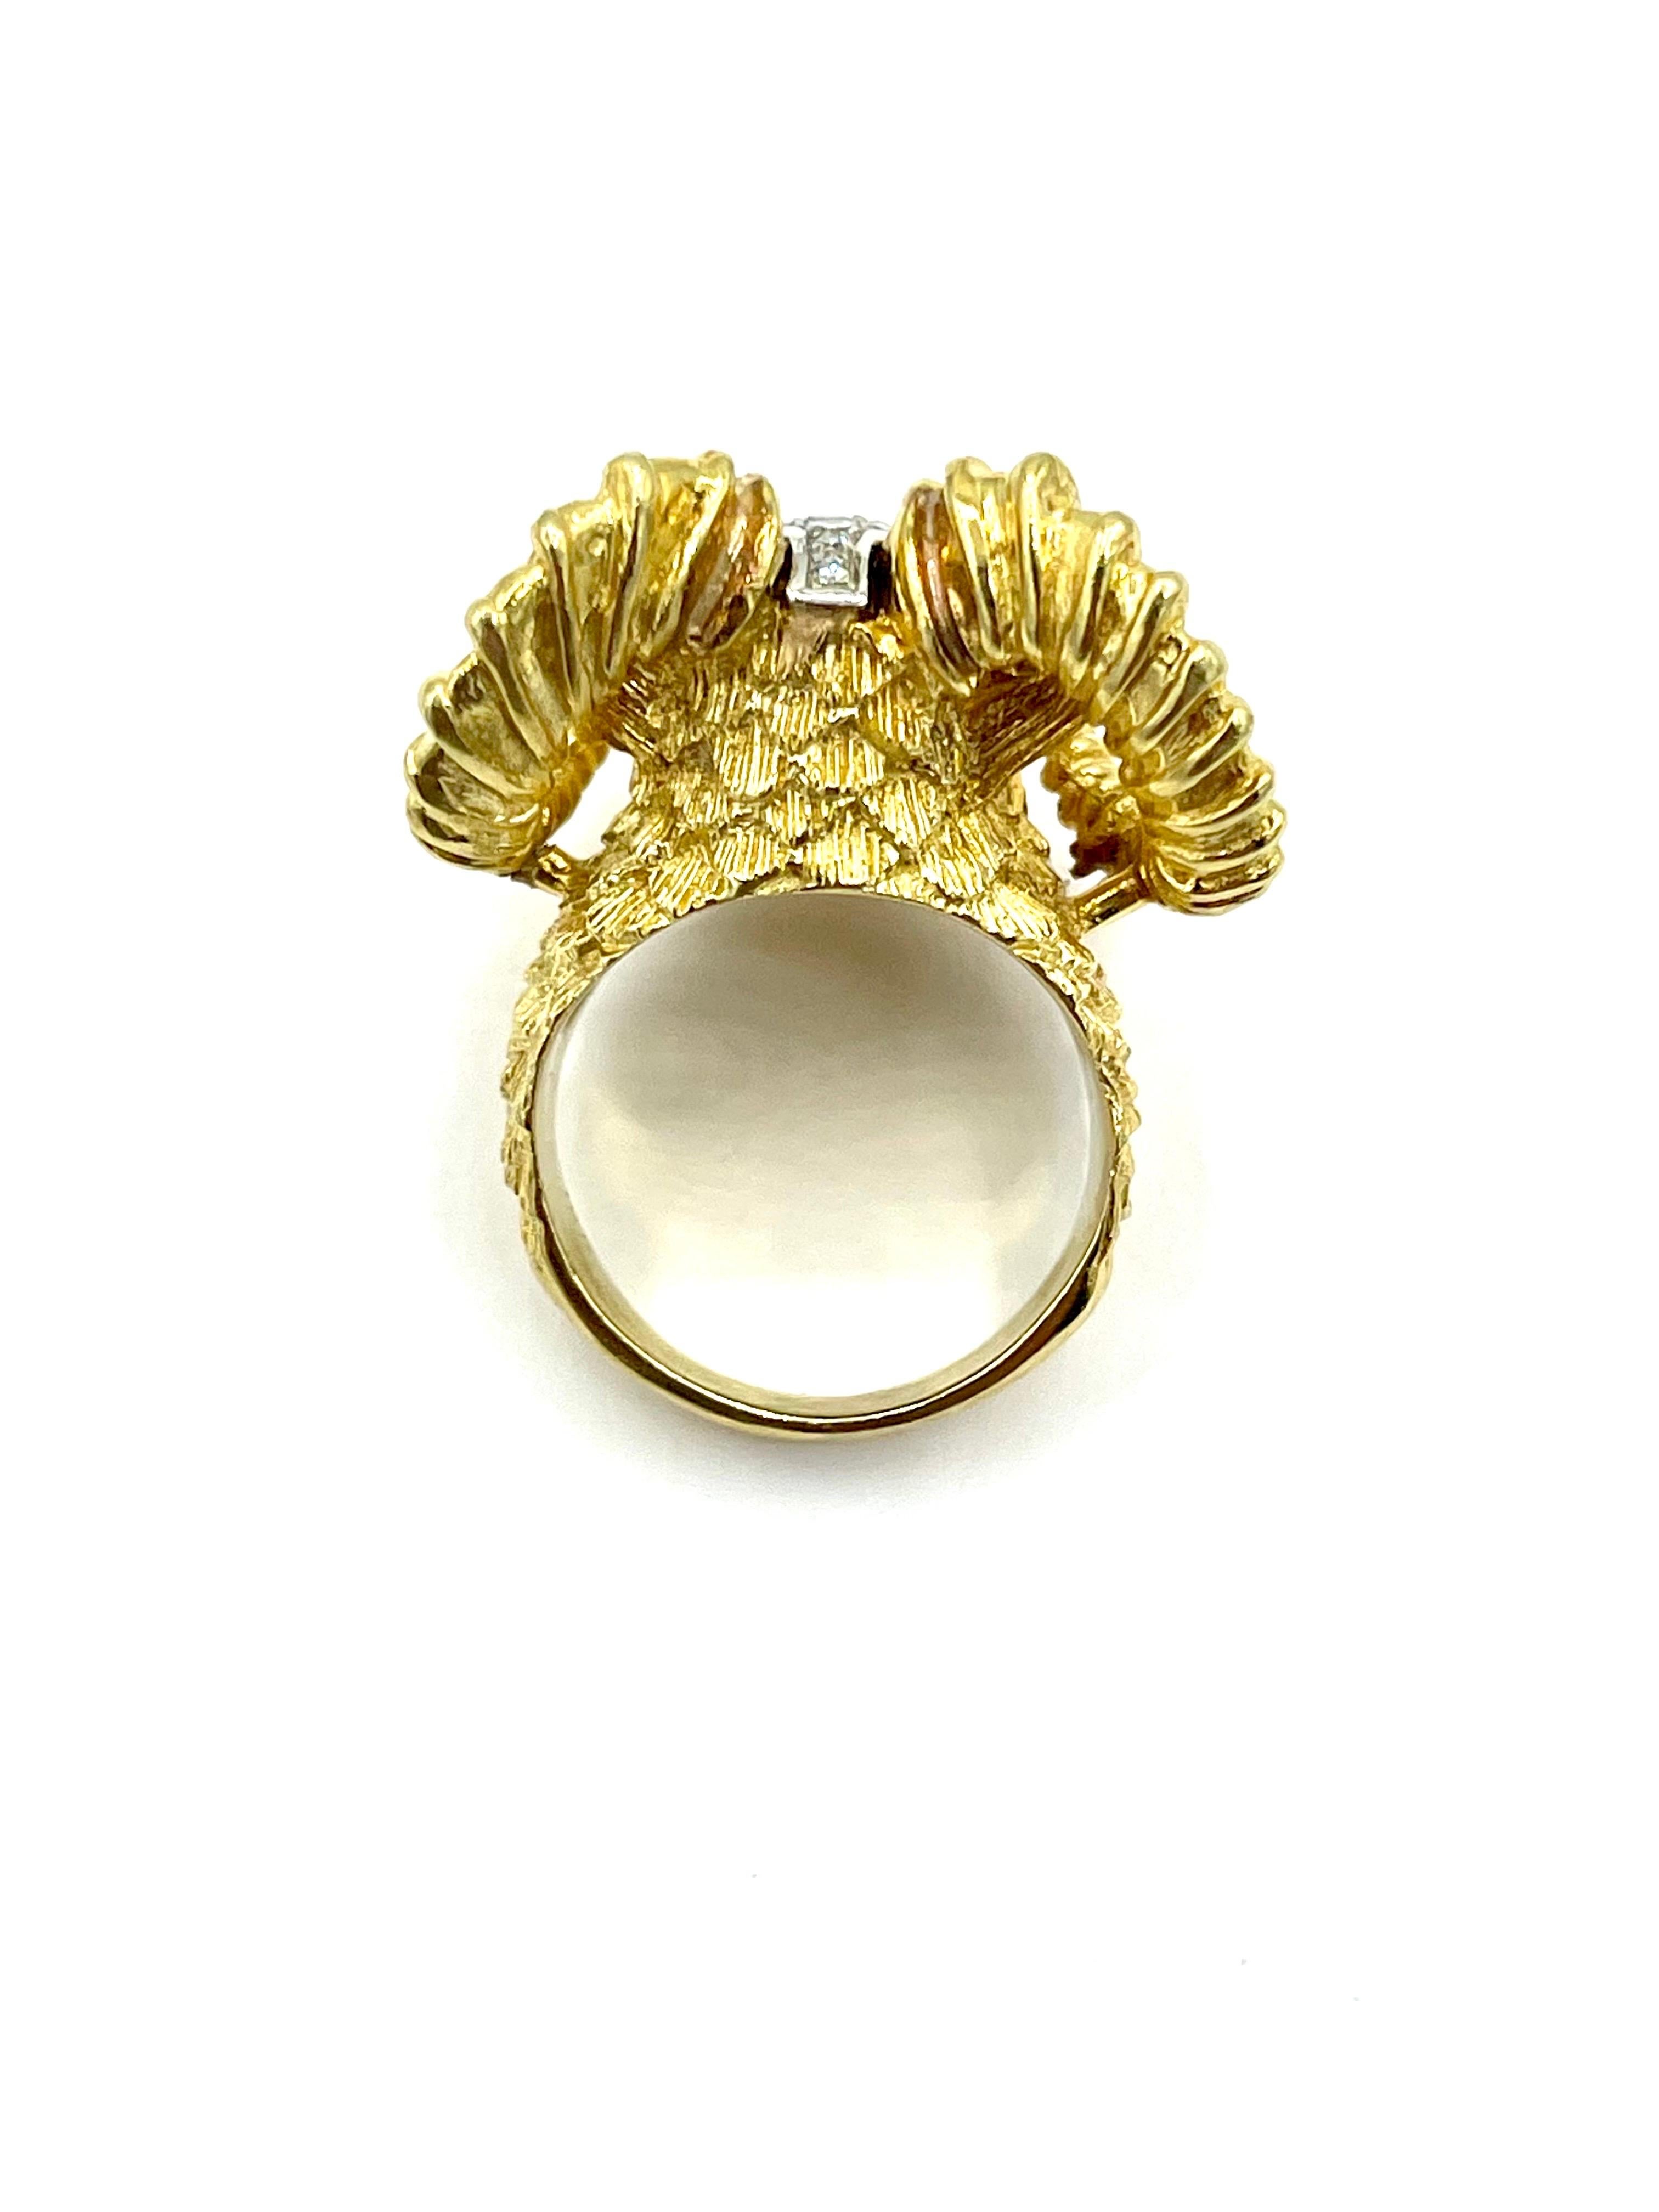 Women's or Men's 18K Yellow Gold Rams Head Ring with 0.14 Carats in Diamonds